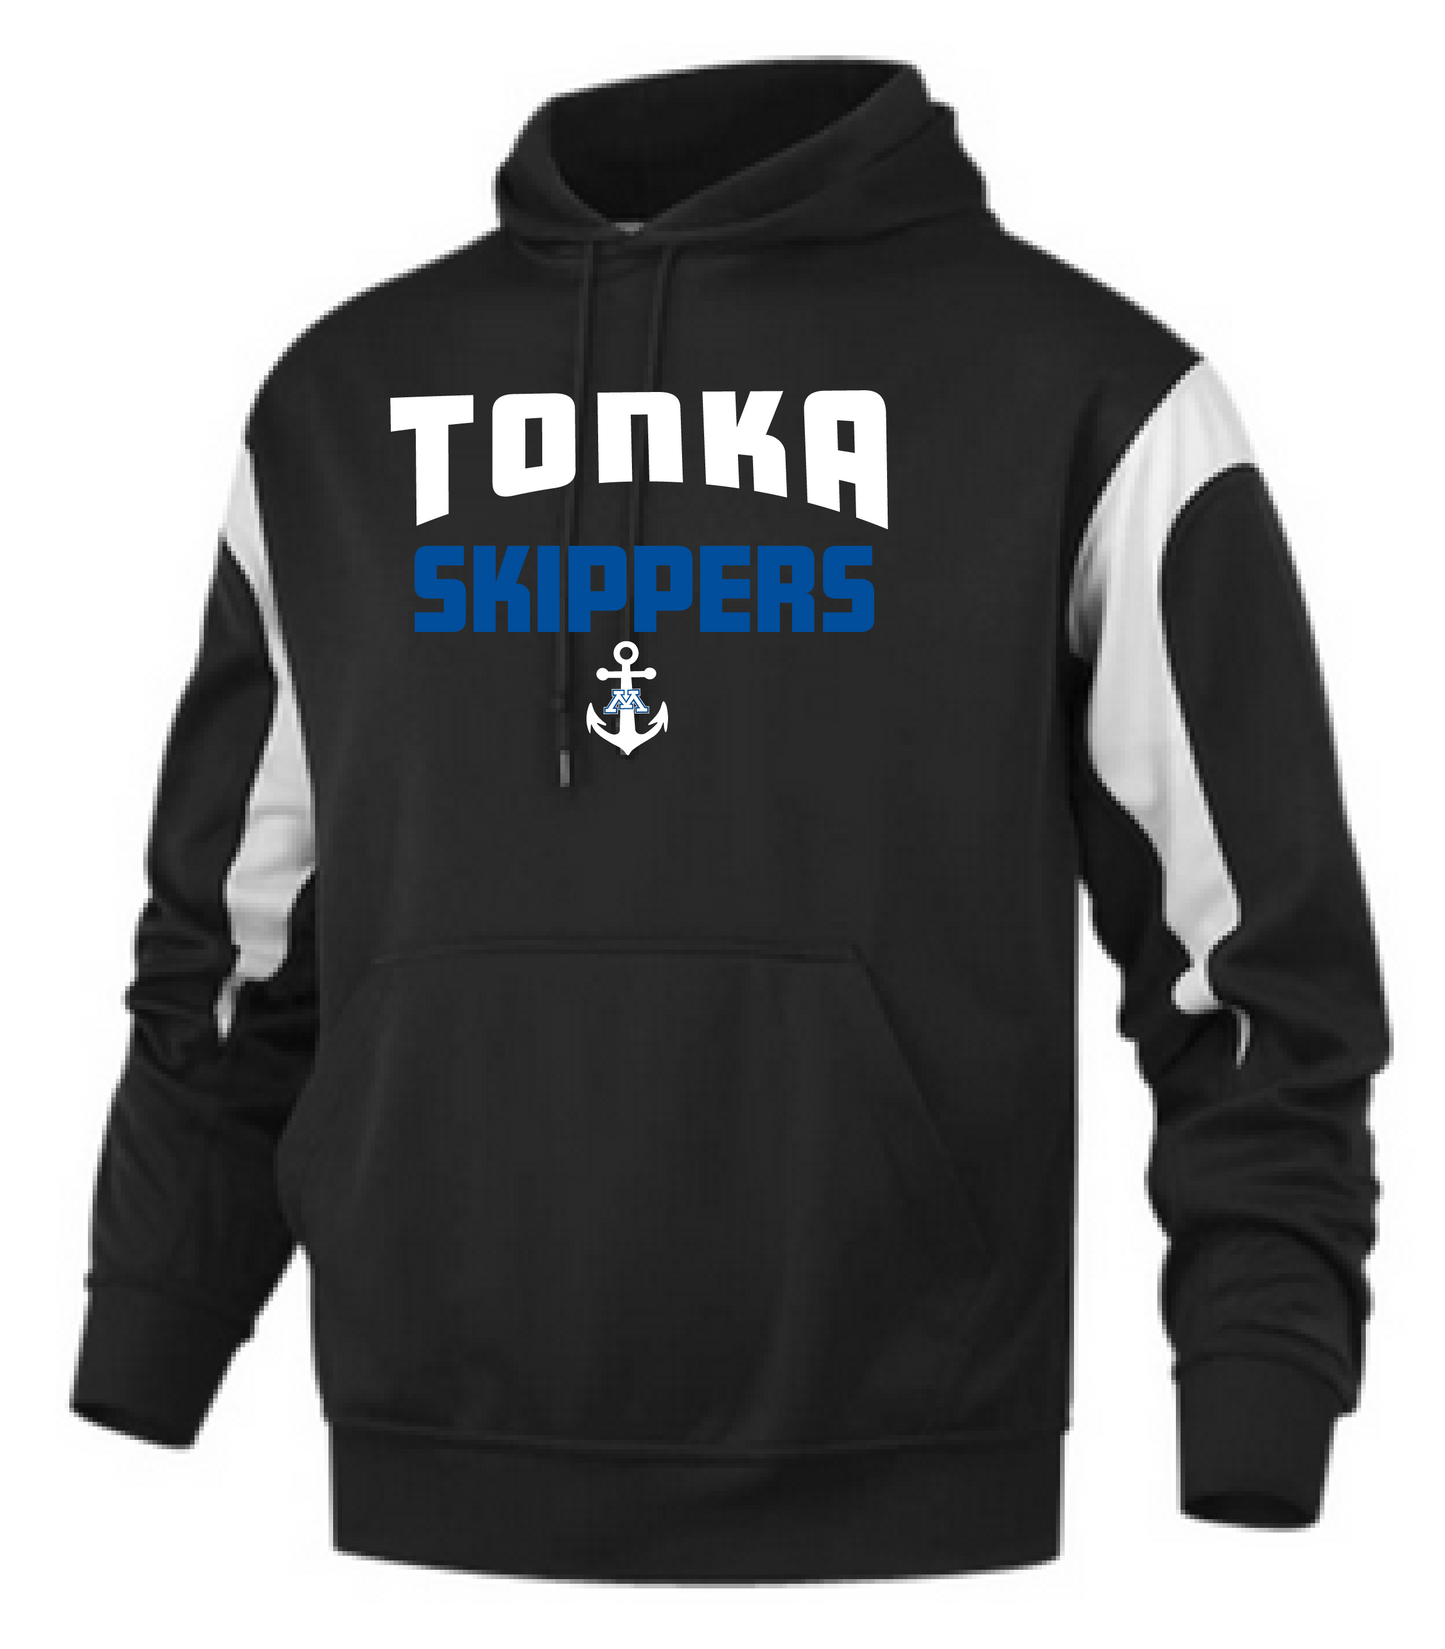 Tonka Skippers Sm Anchor White Panel Hoodie - Adult